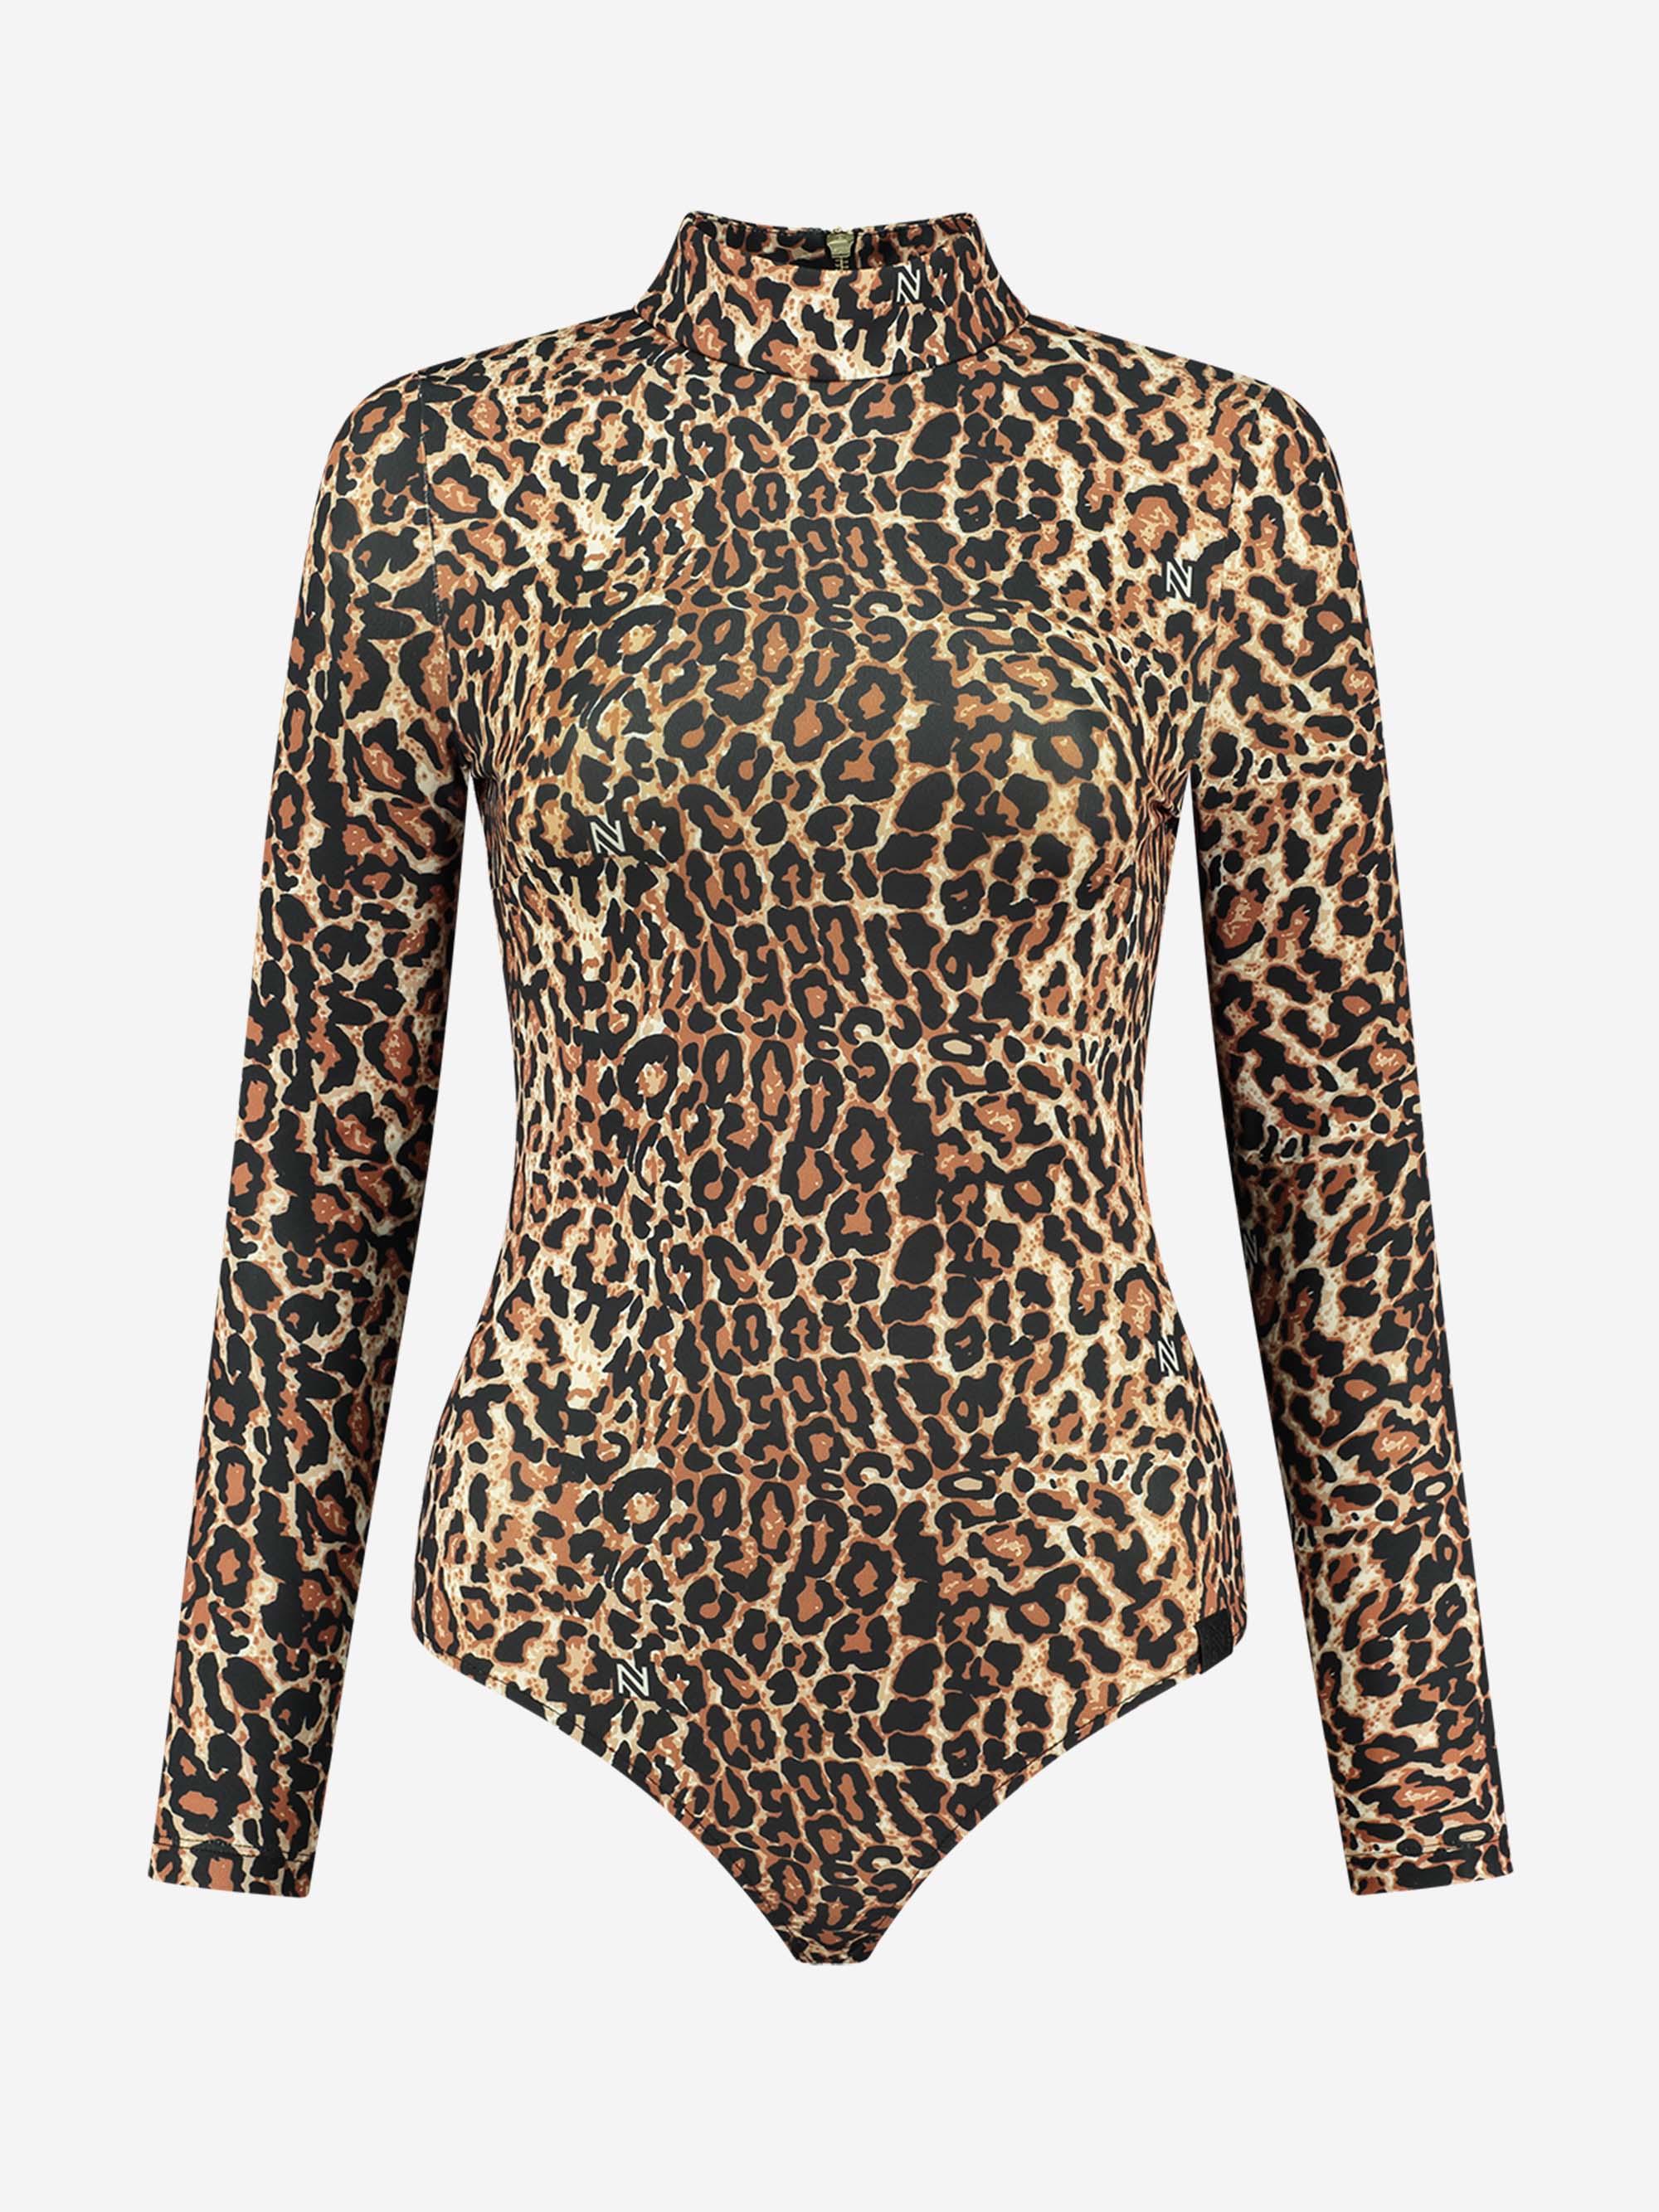 Fitted body with leopard print 